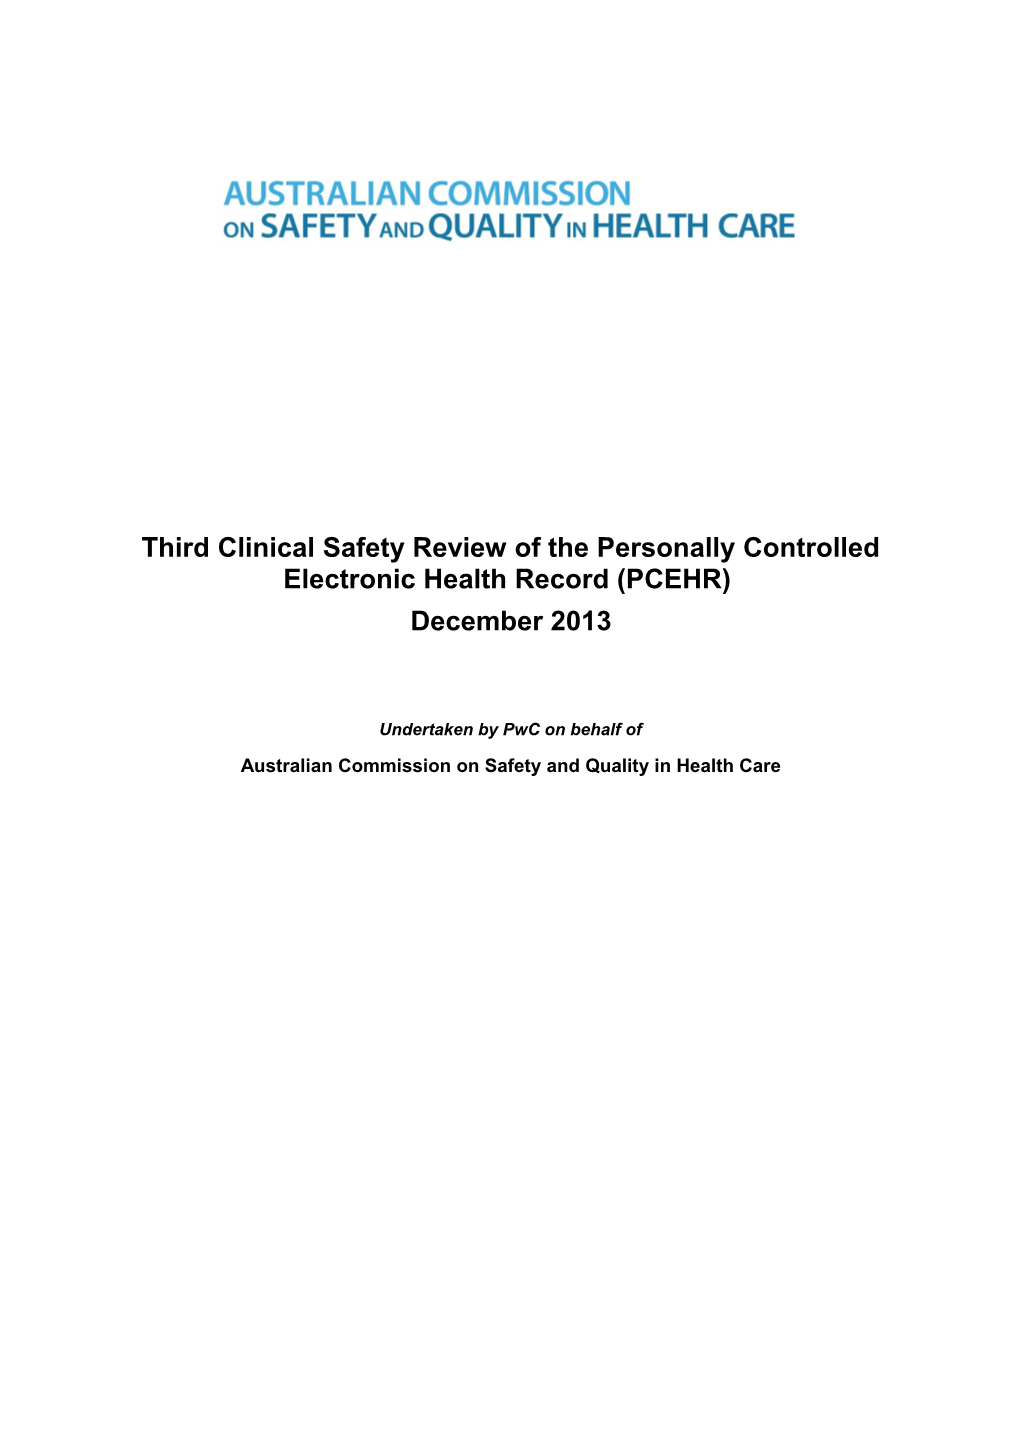 Third Clinical Safety Review of the Personally Controlled Electronic Health Record (PCEHR)